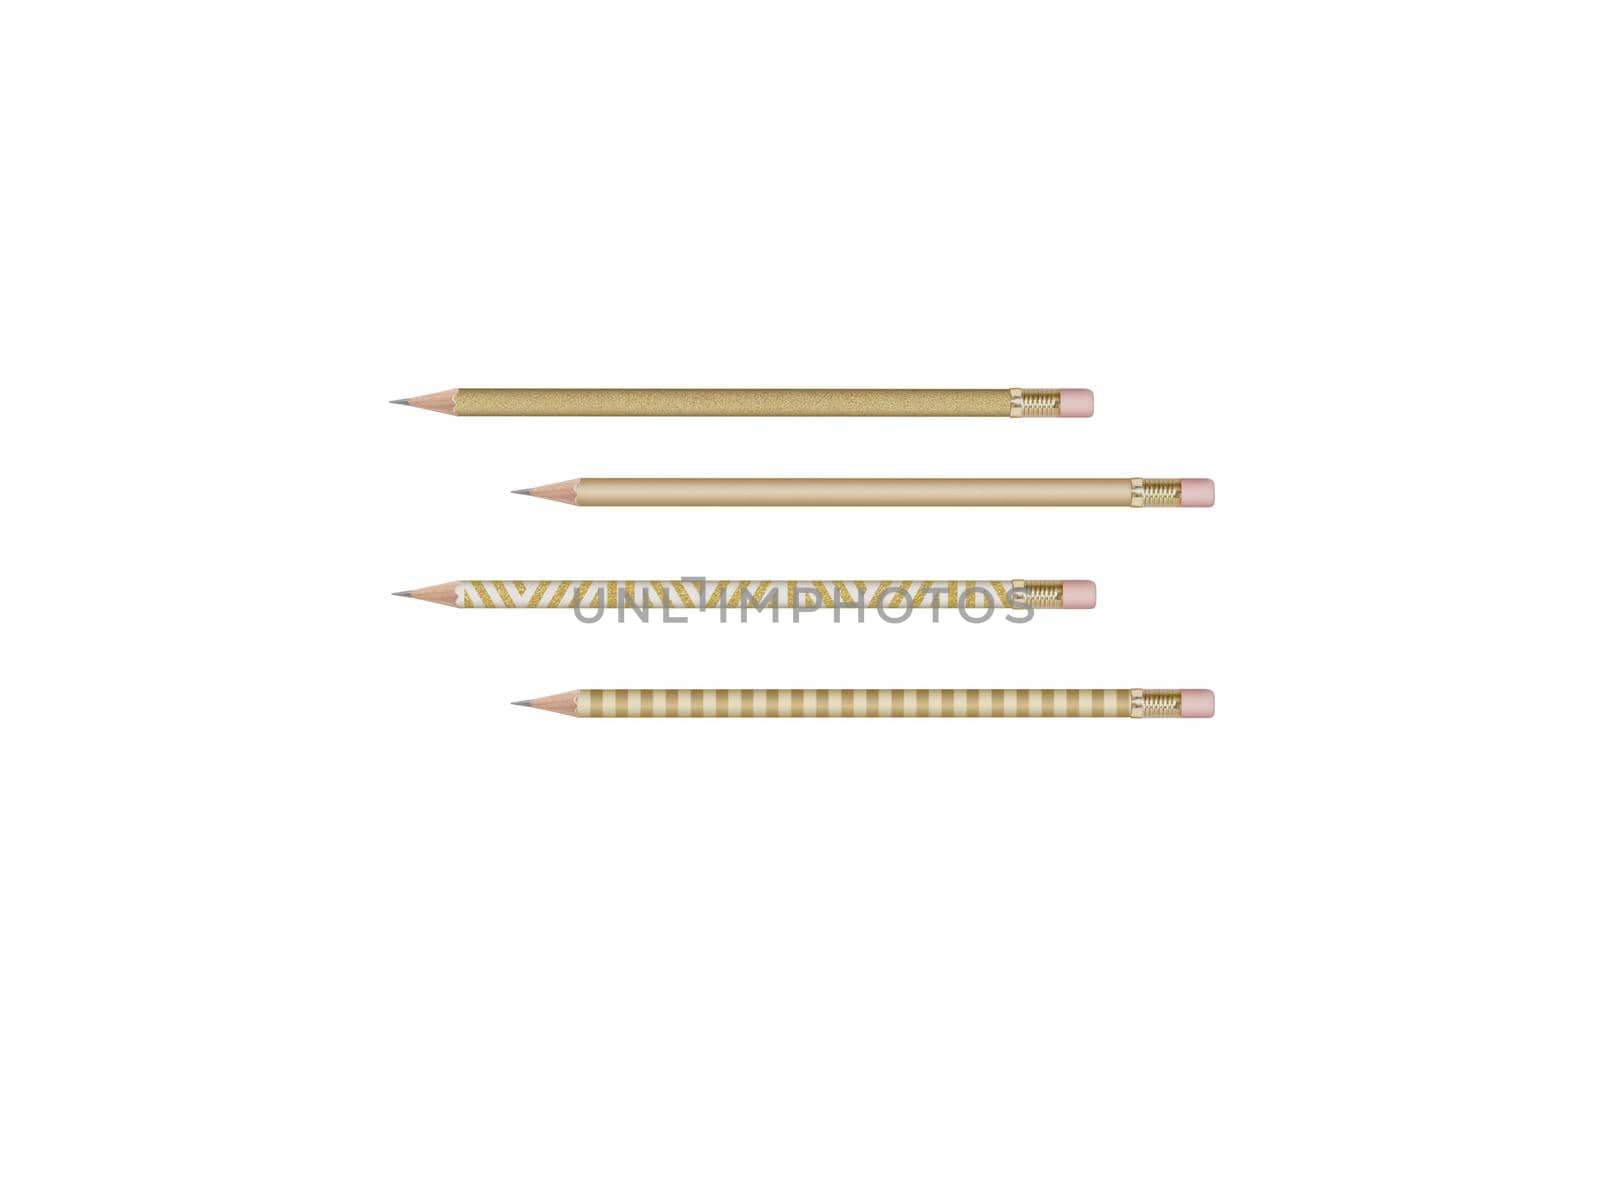 several very beautiful pencils on a white background - 3d rendering by mariephotos